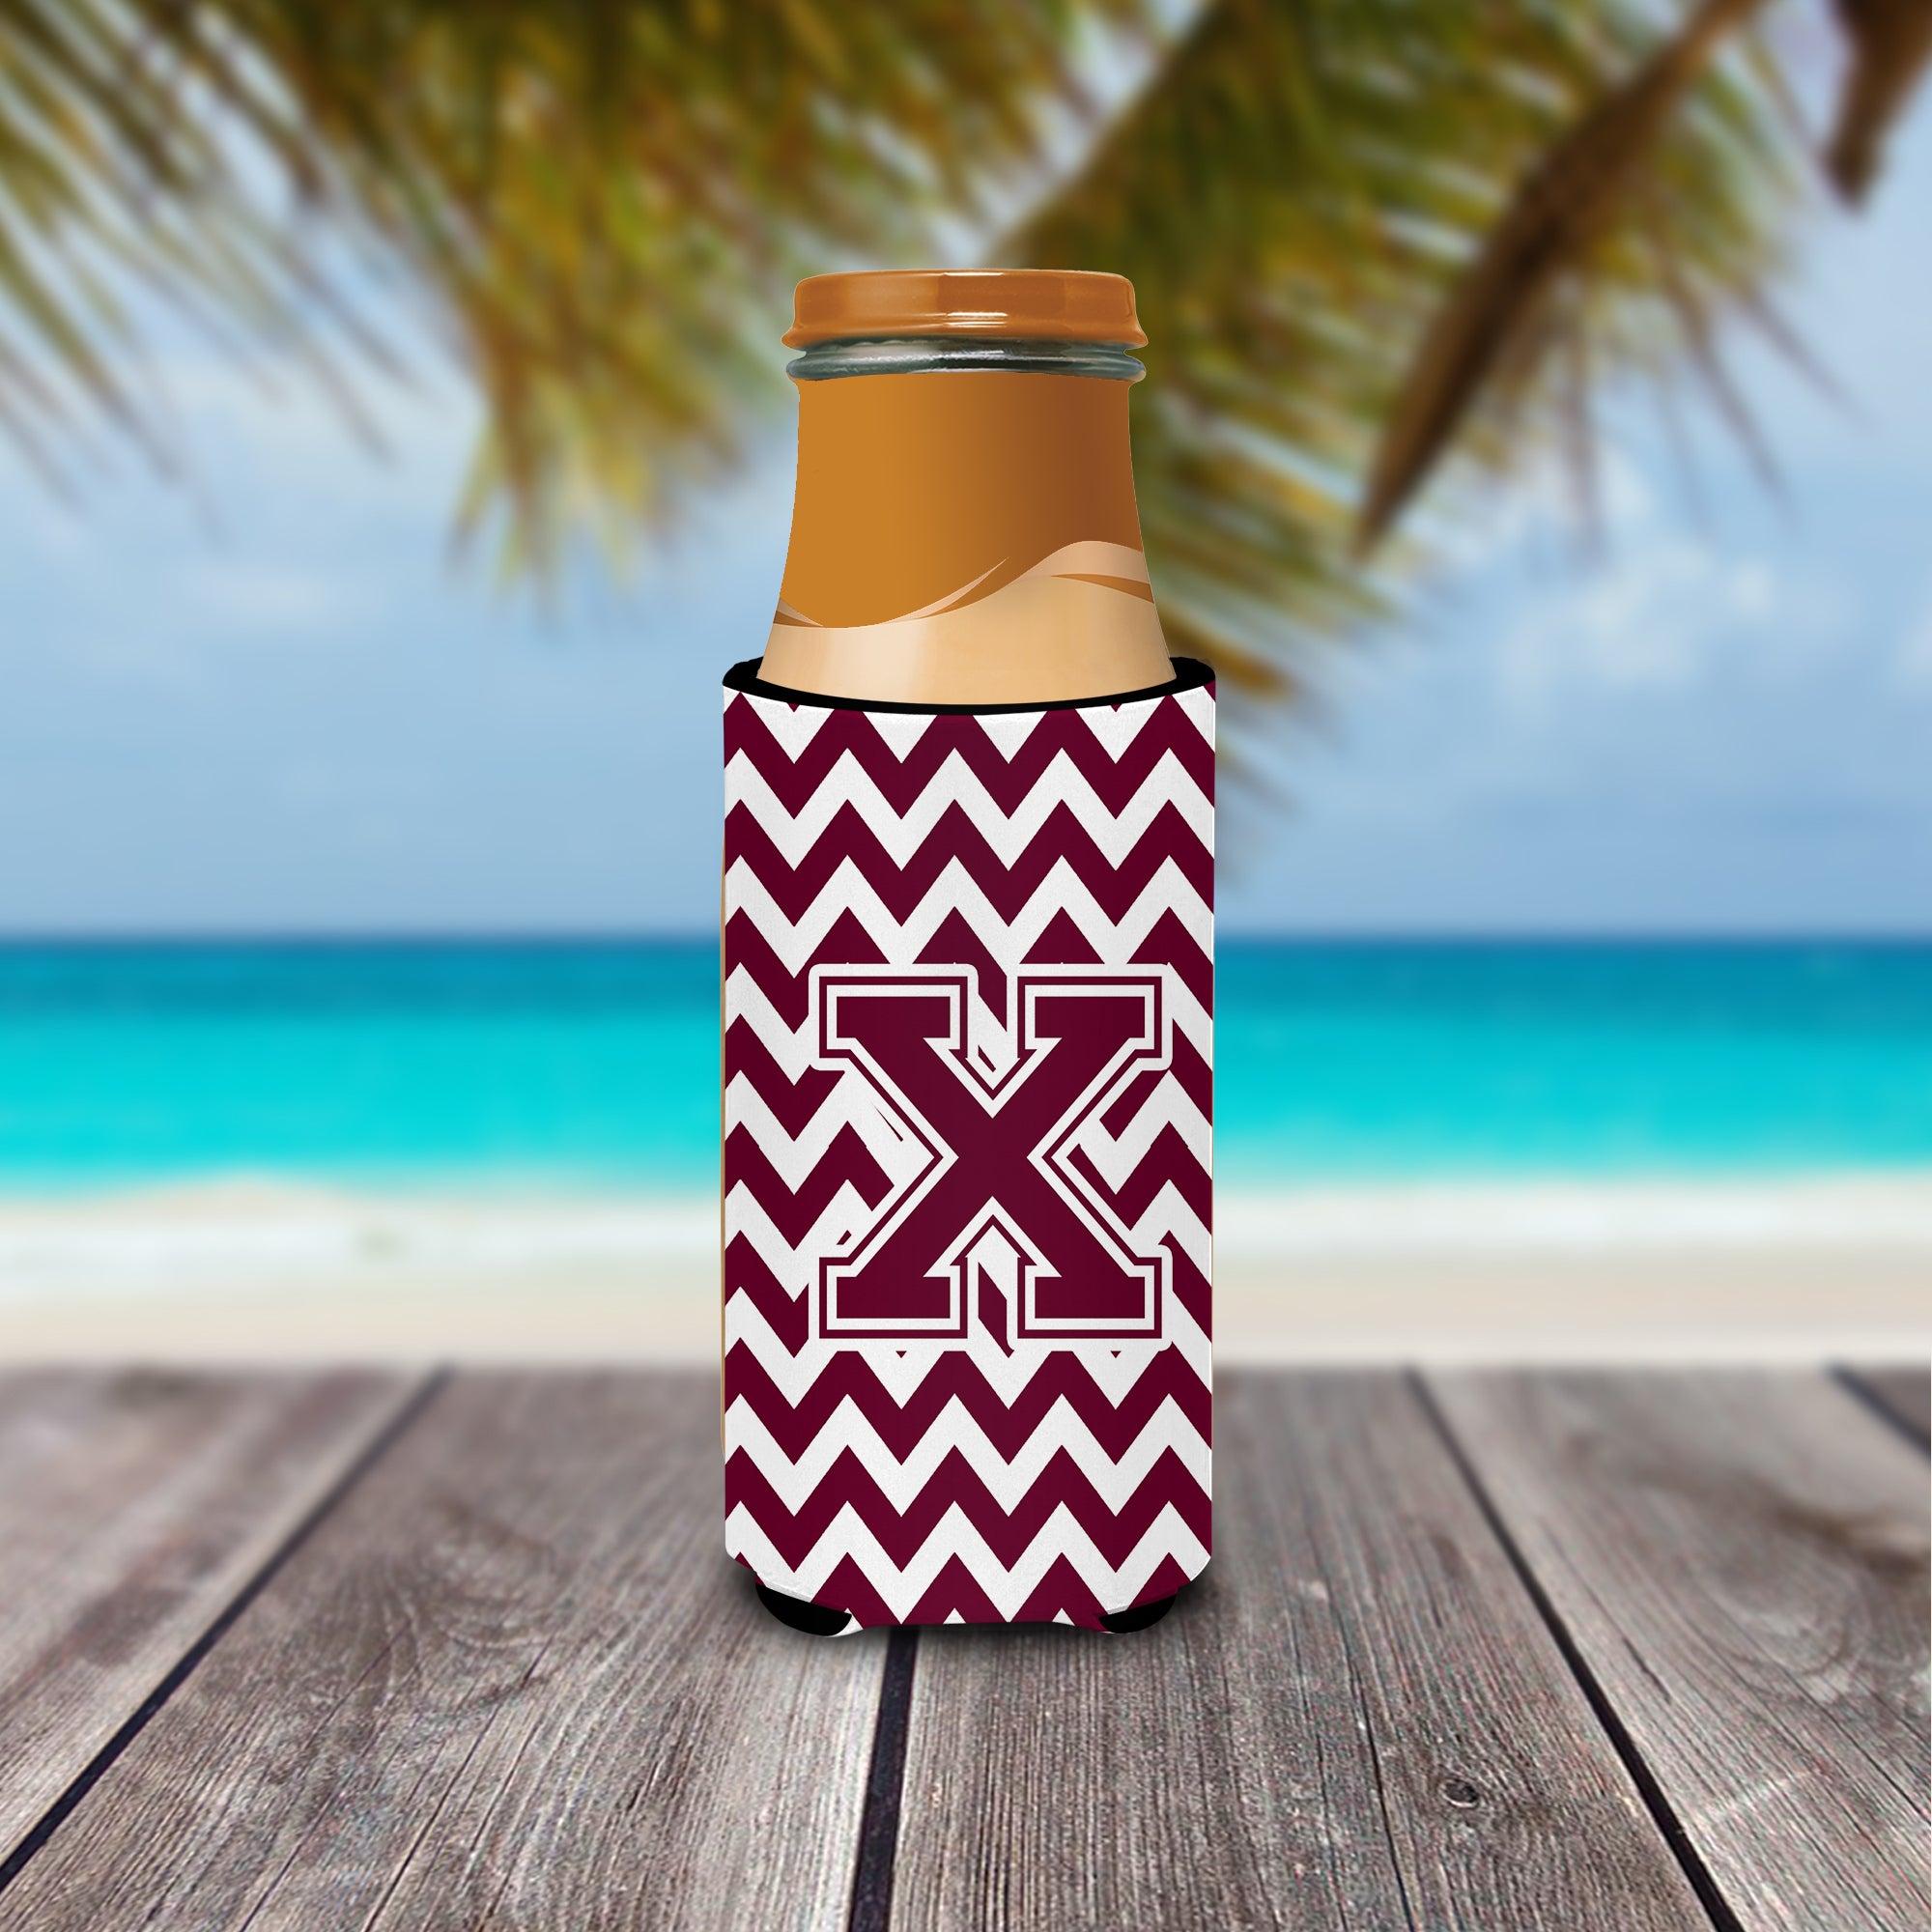 Letter X Chevron Maroon and White  Ultra Beverage Insulators for slim cans CJ1051-XMUK.